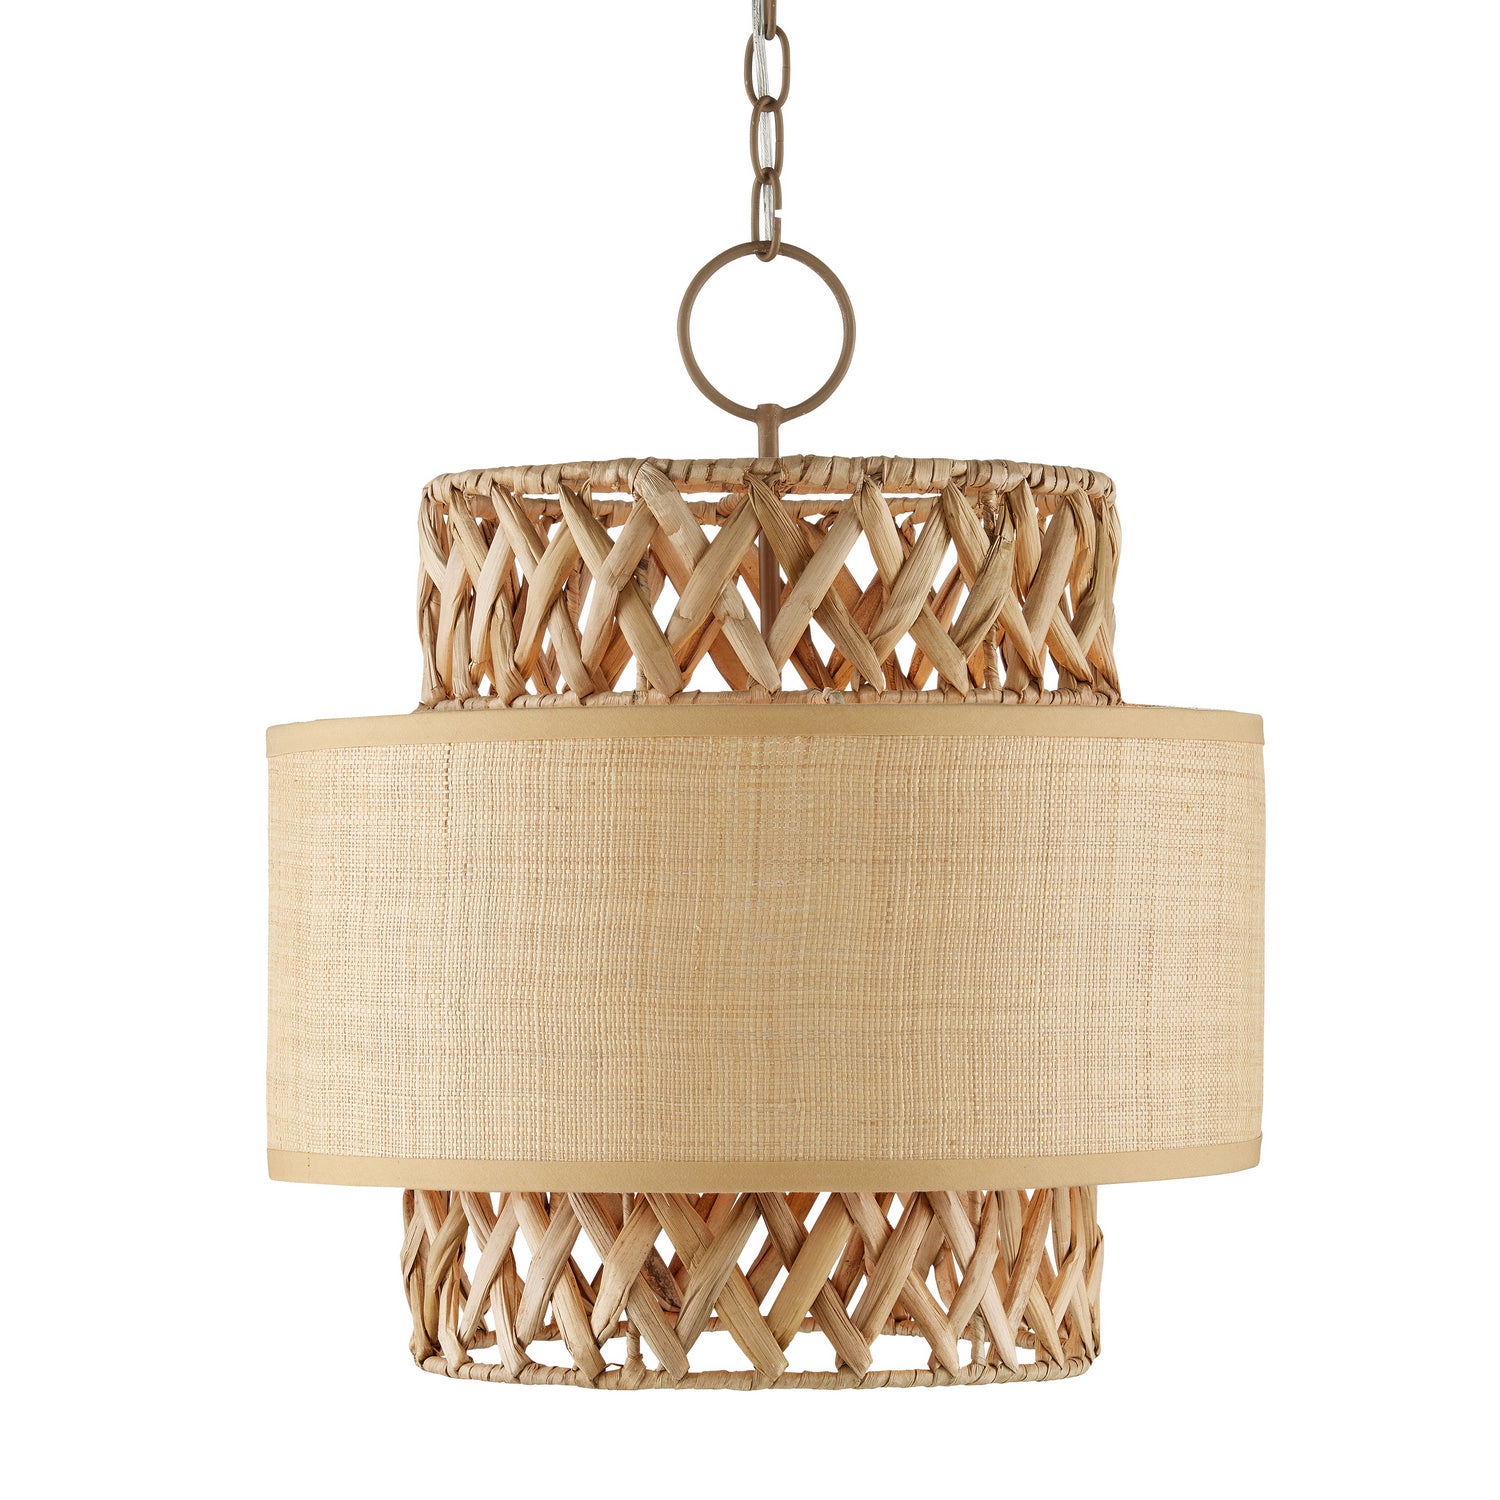 Four Light Pendant from the Isola collection in Khaki/Natural finish